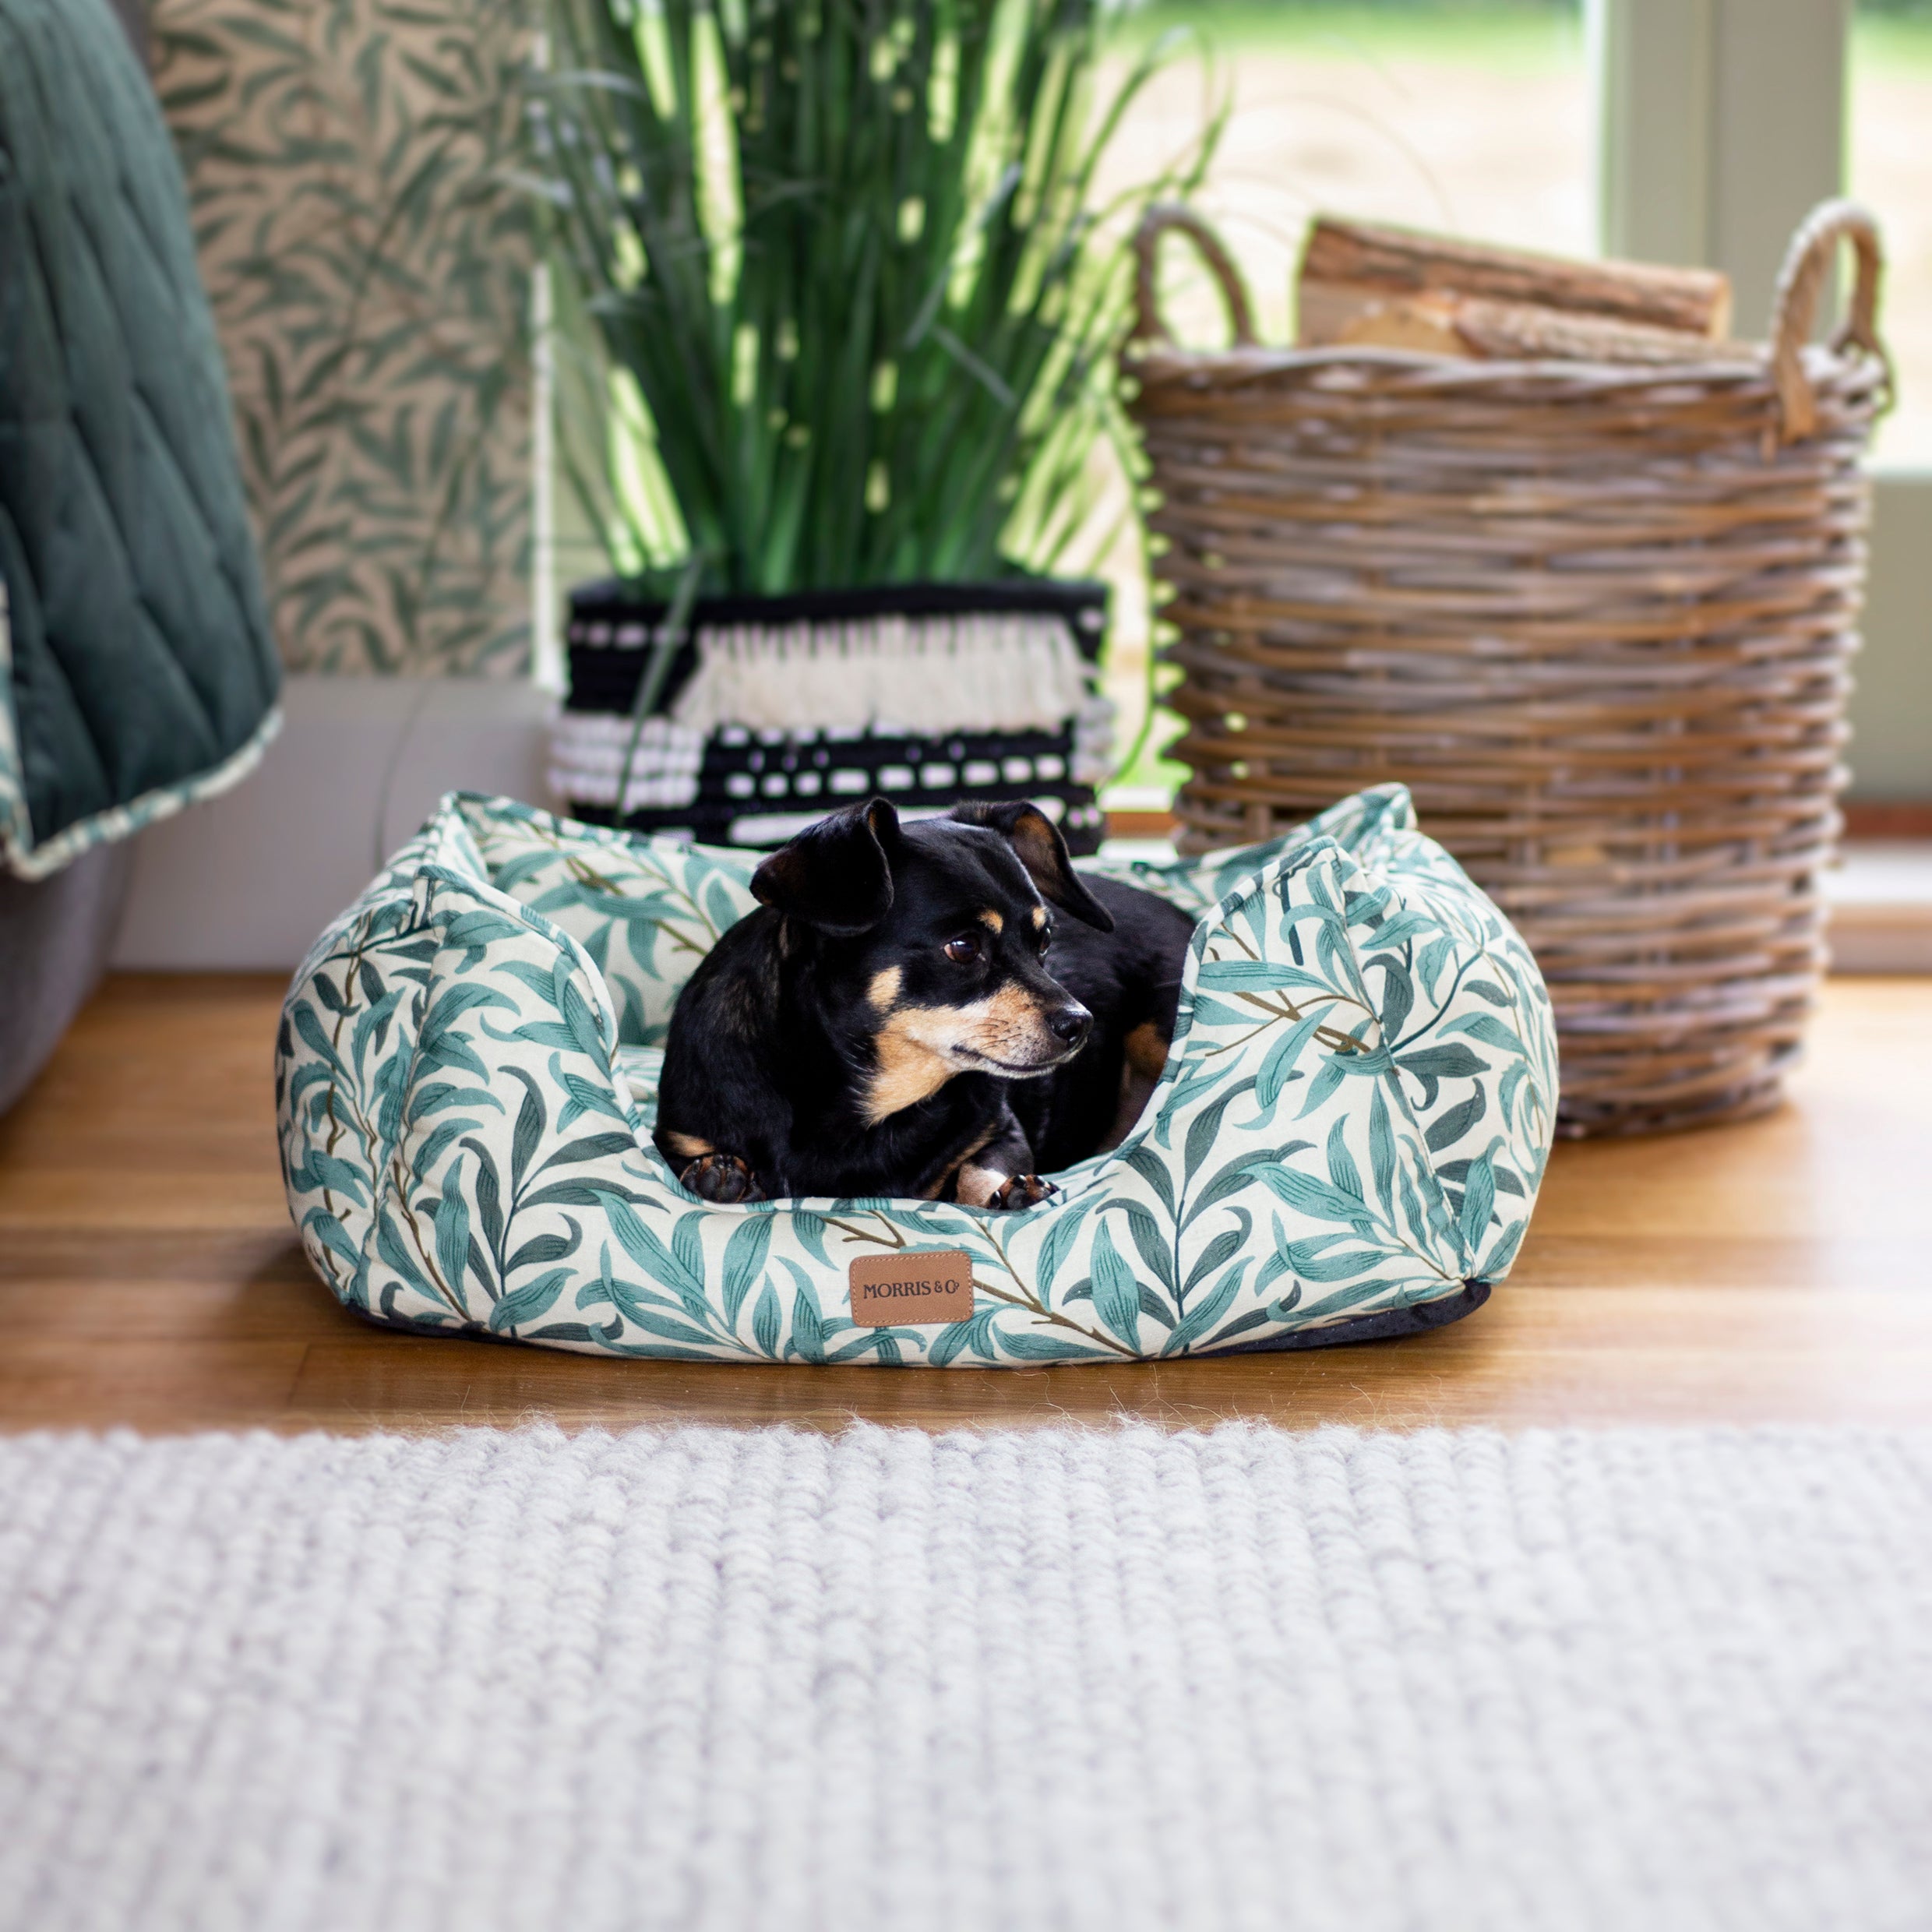 Morris & Co Willow Boughs Pet Box Bed Green